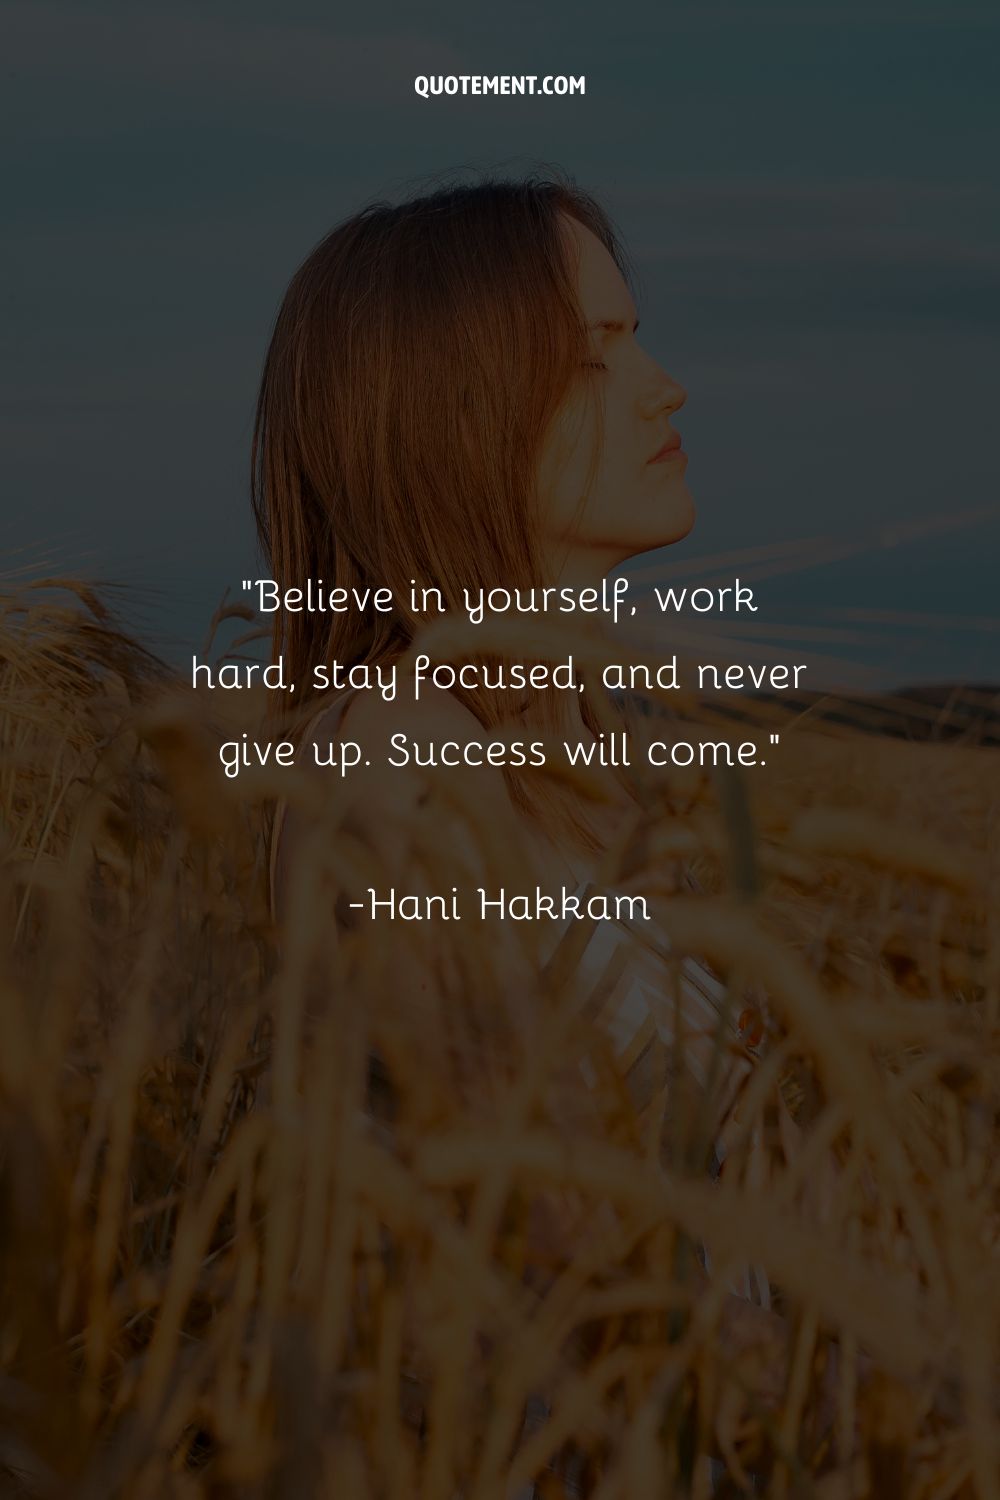 Believe in yourself, work hard, stay focused, and never give up. Success will come.